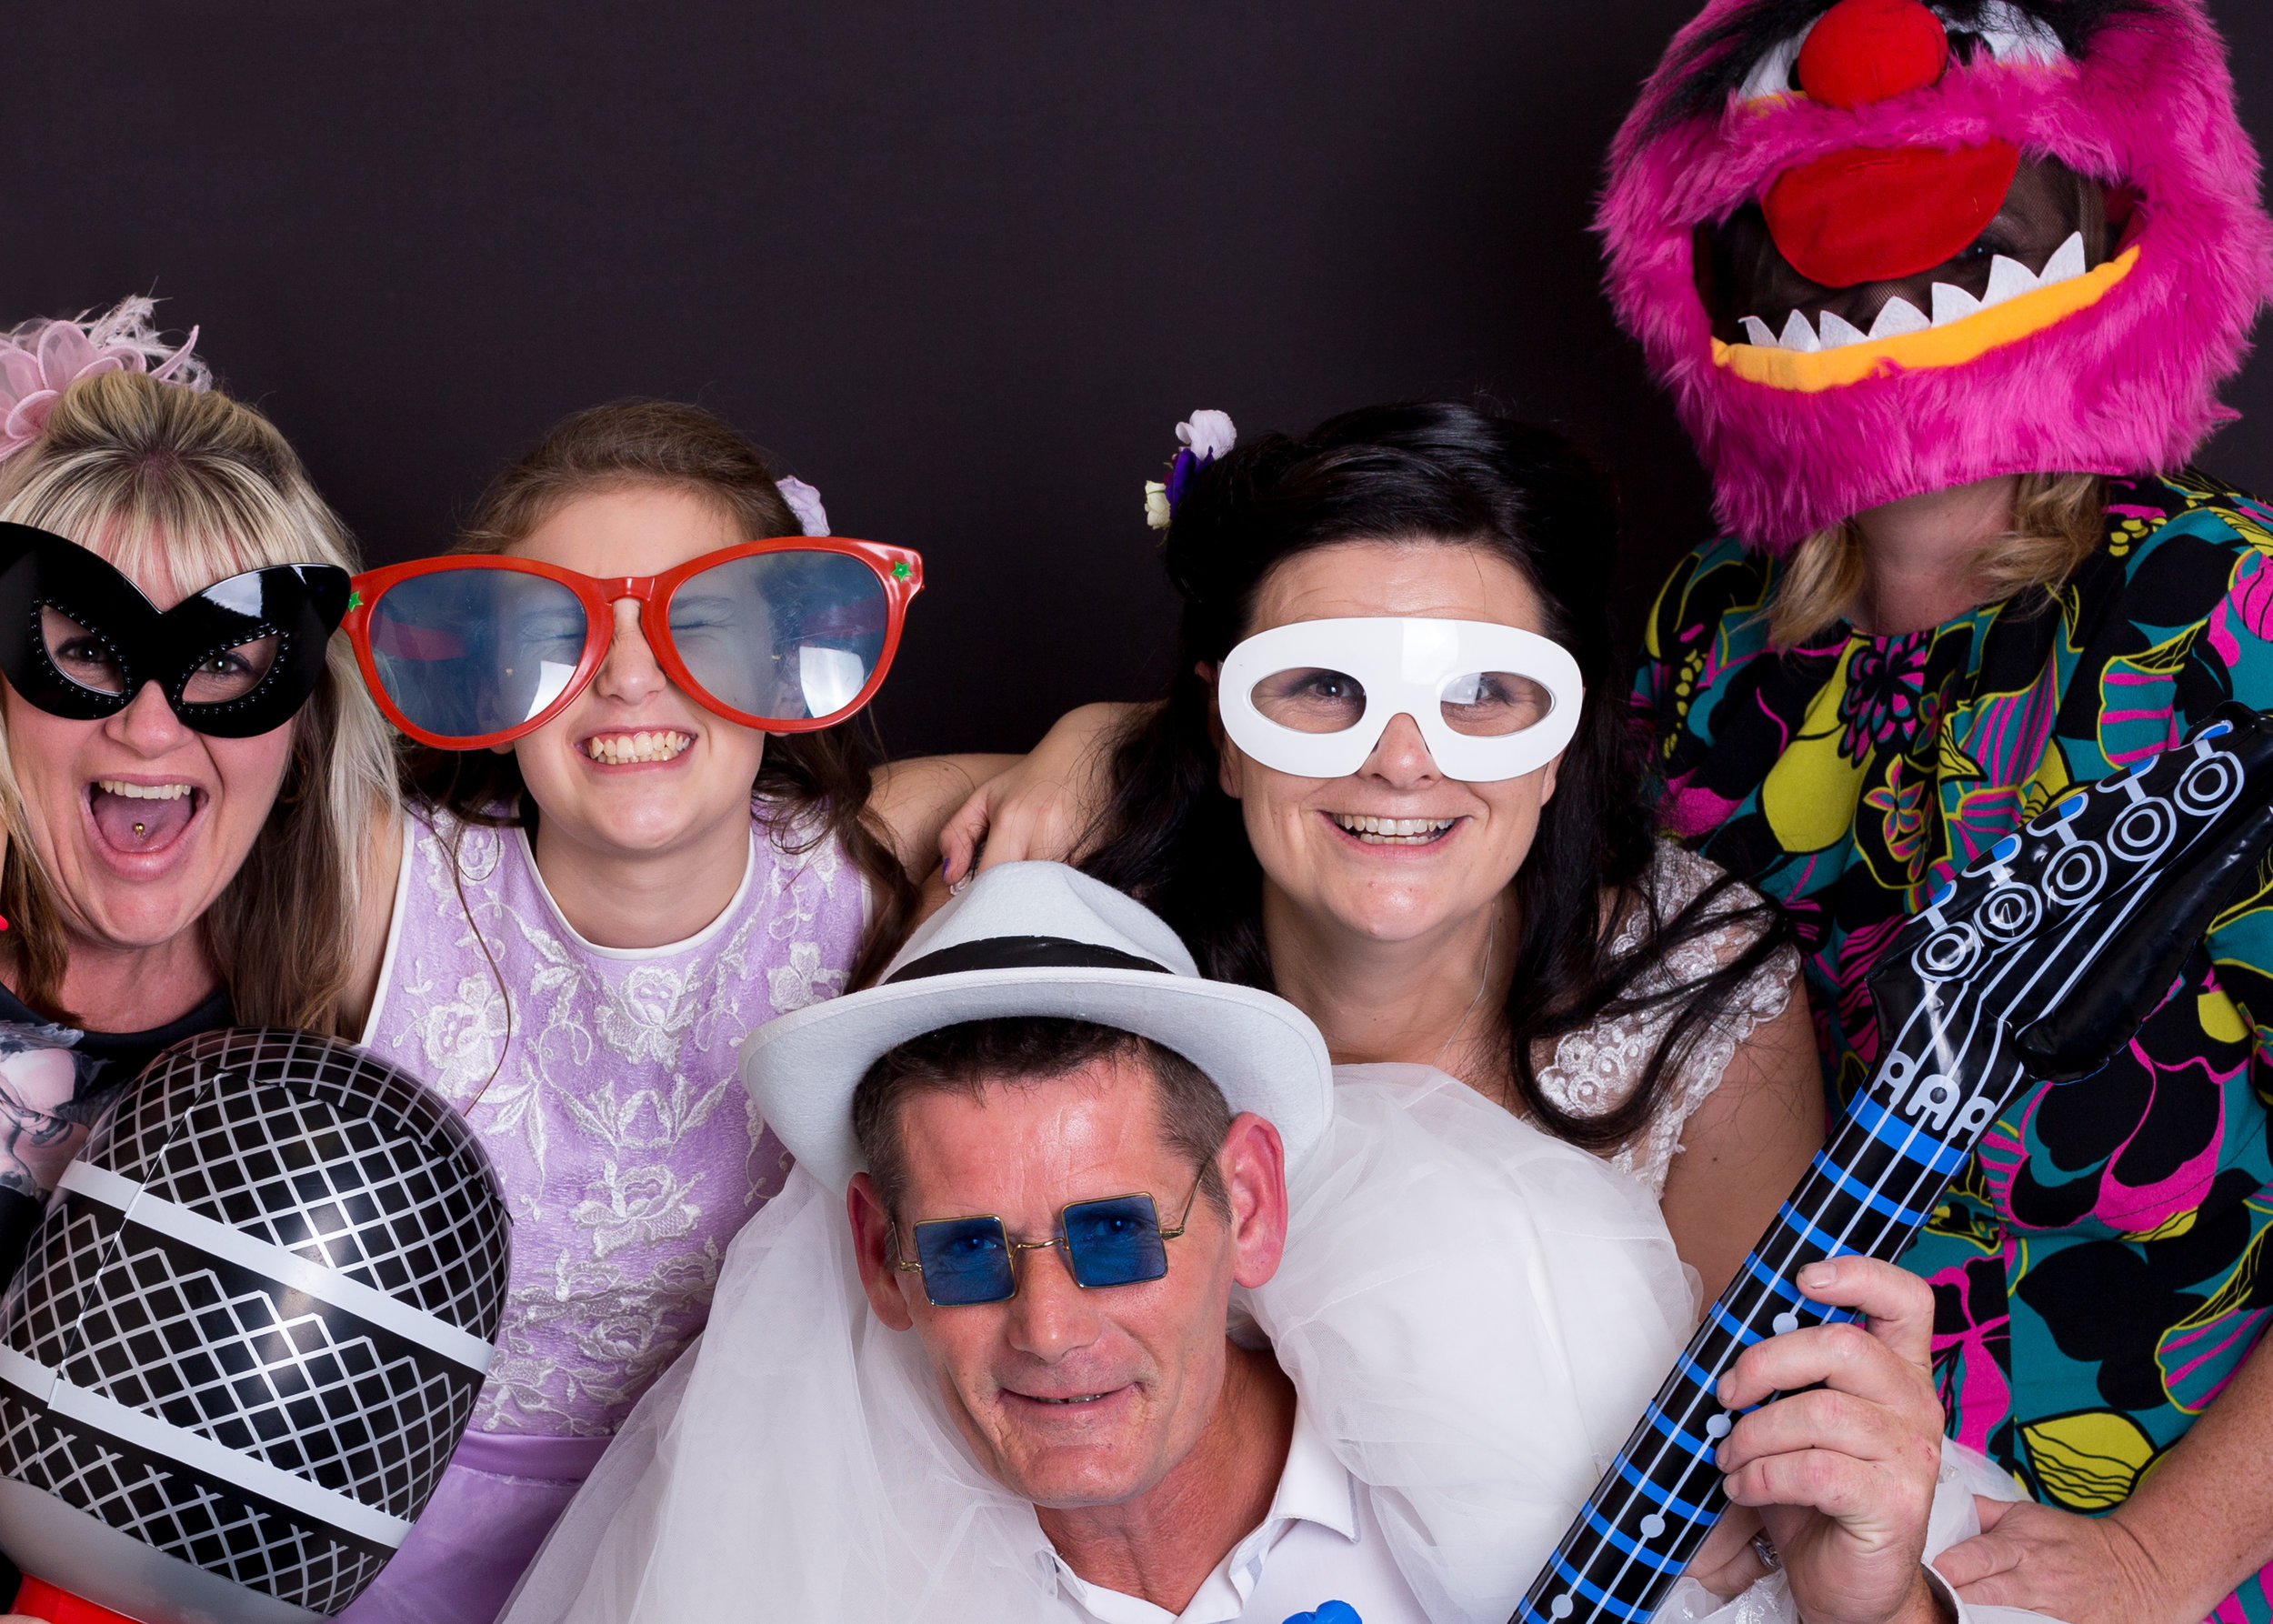 fun in the Photo Booth, pontypridd cardiff south wales